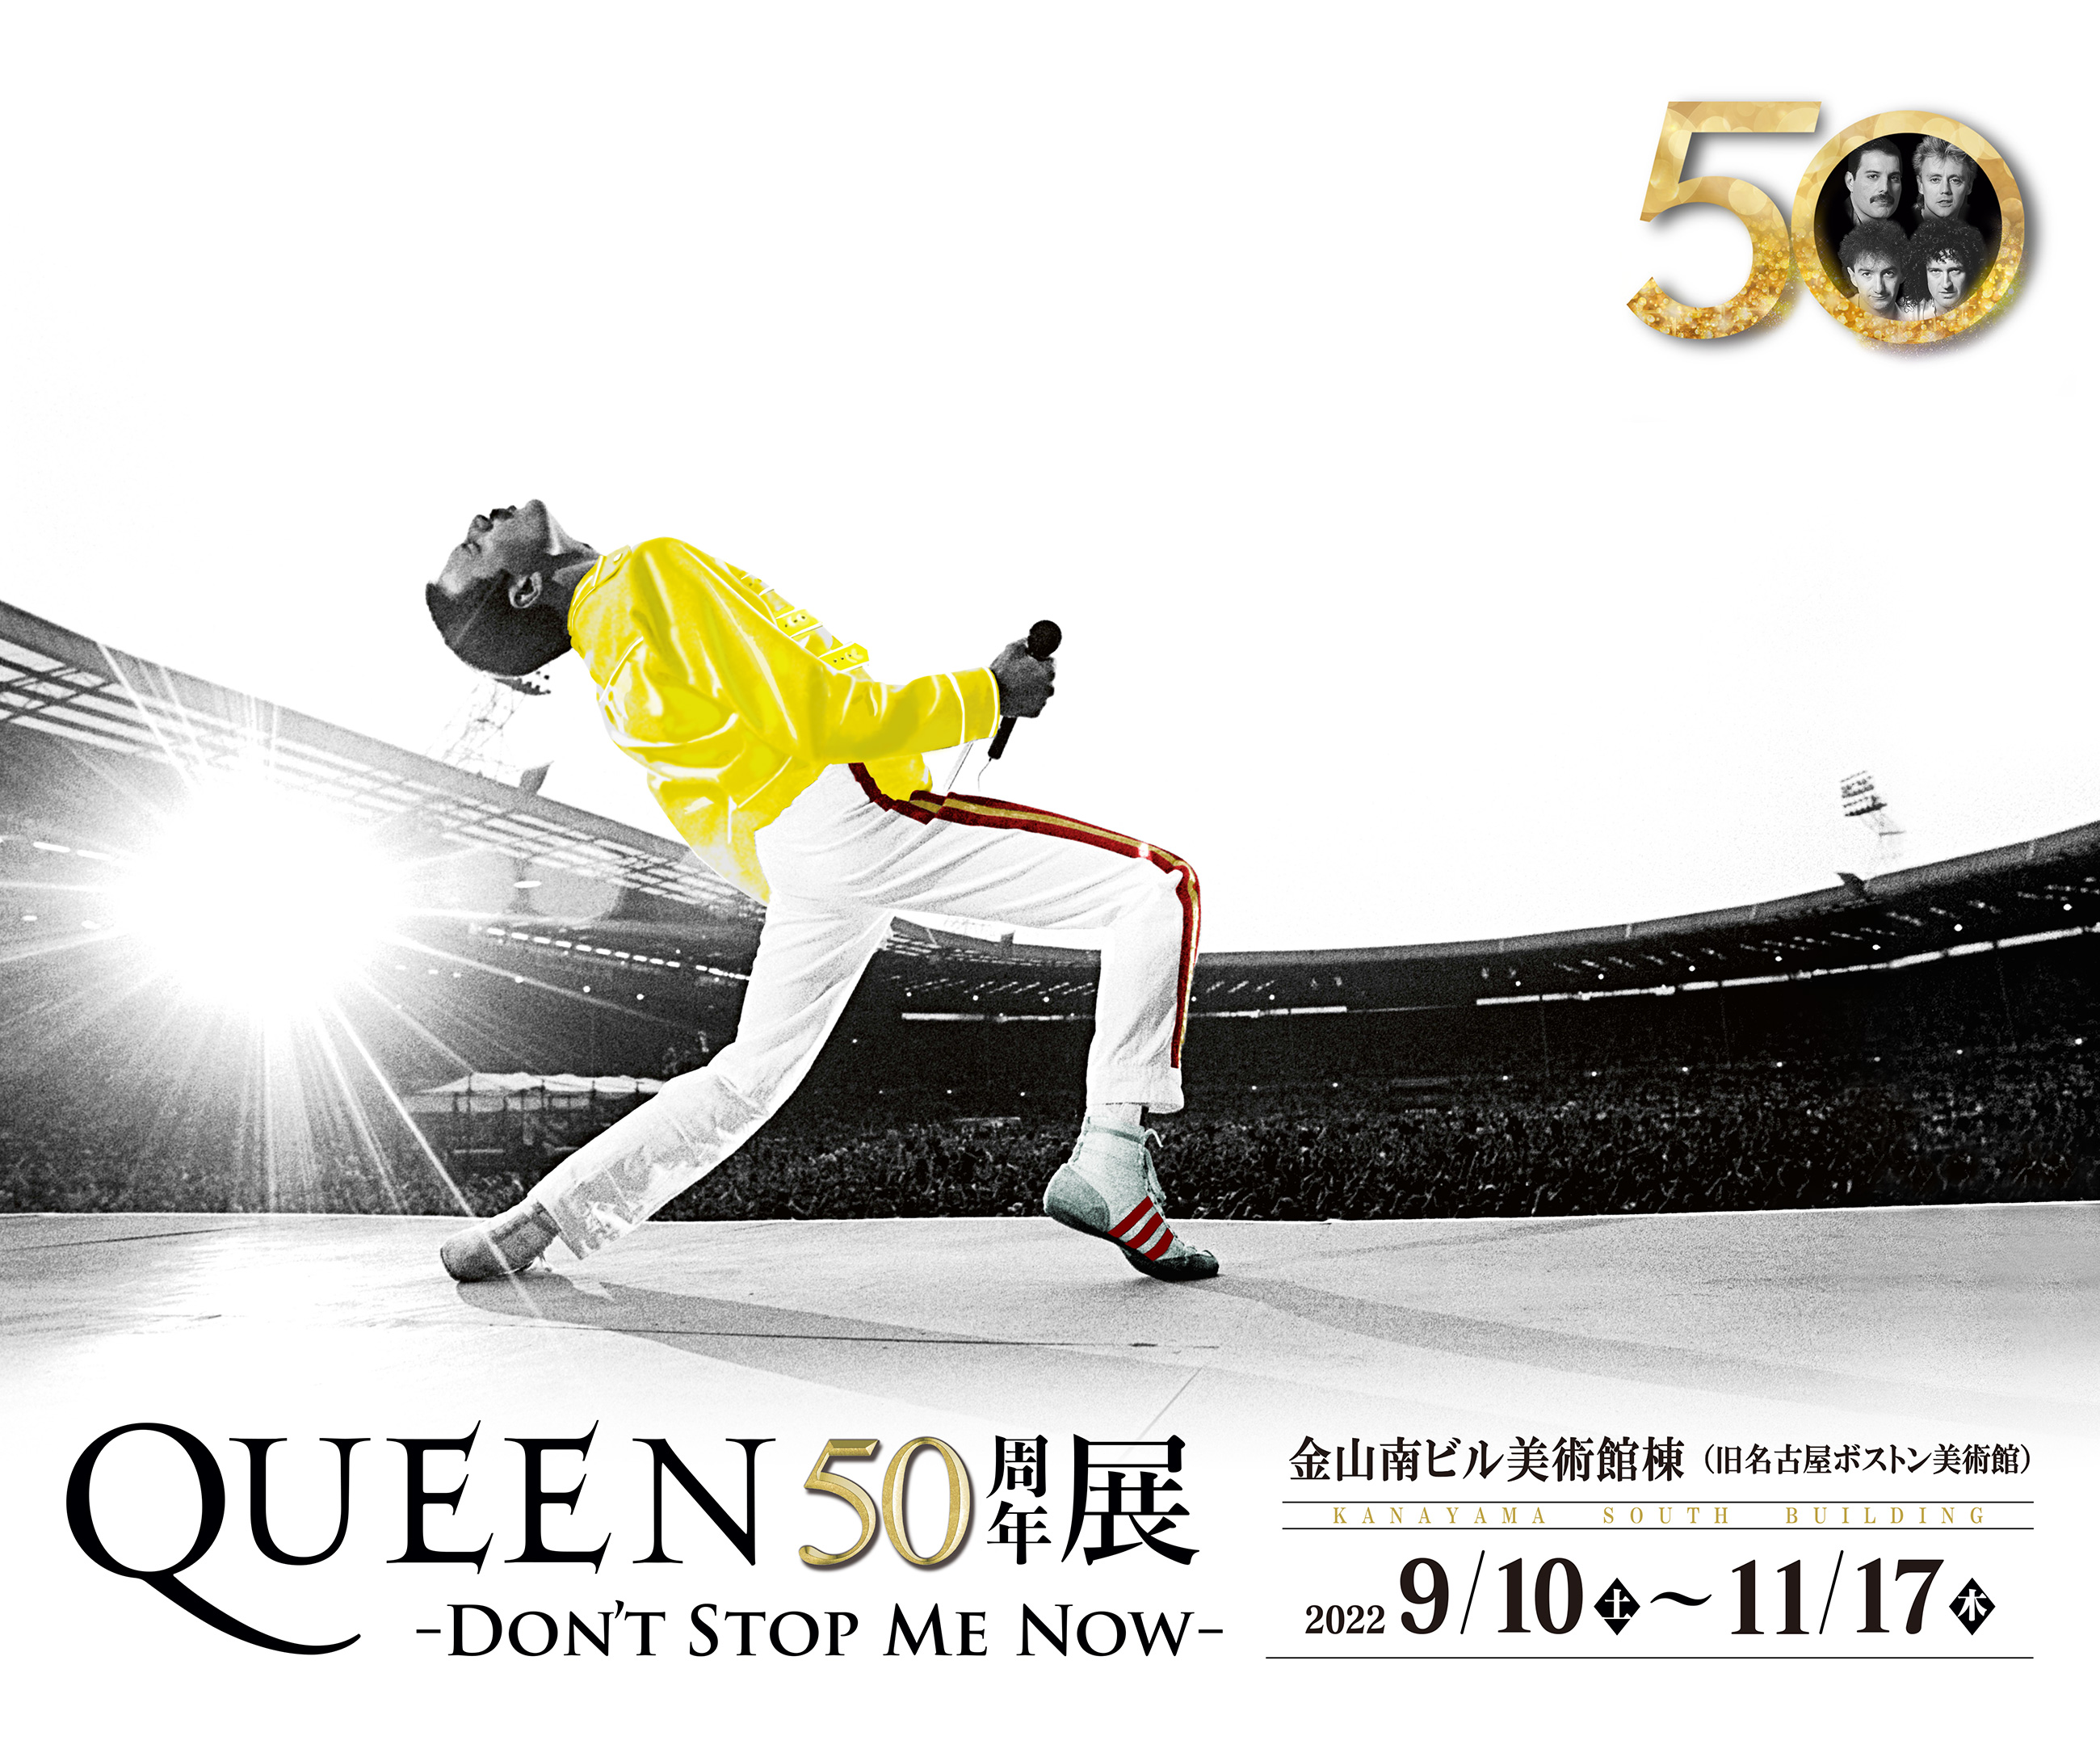 QUEEN 50周年展 -DON'T STOP ME NOW- | 9月10日（土）より開催